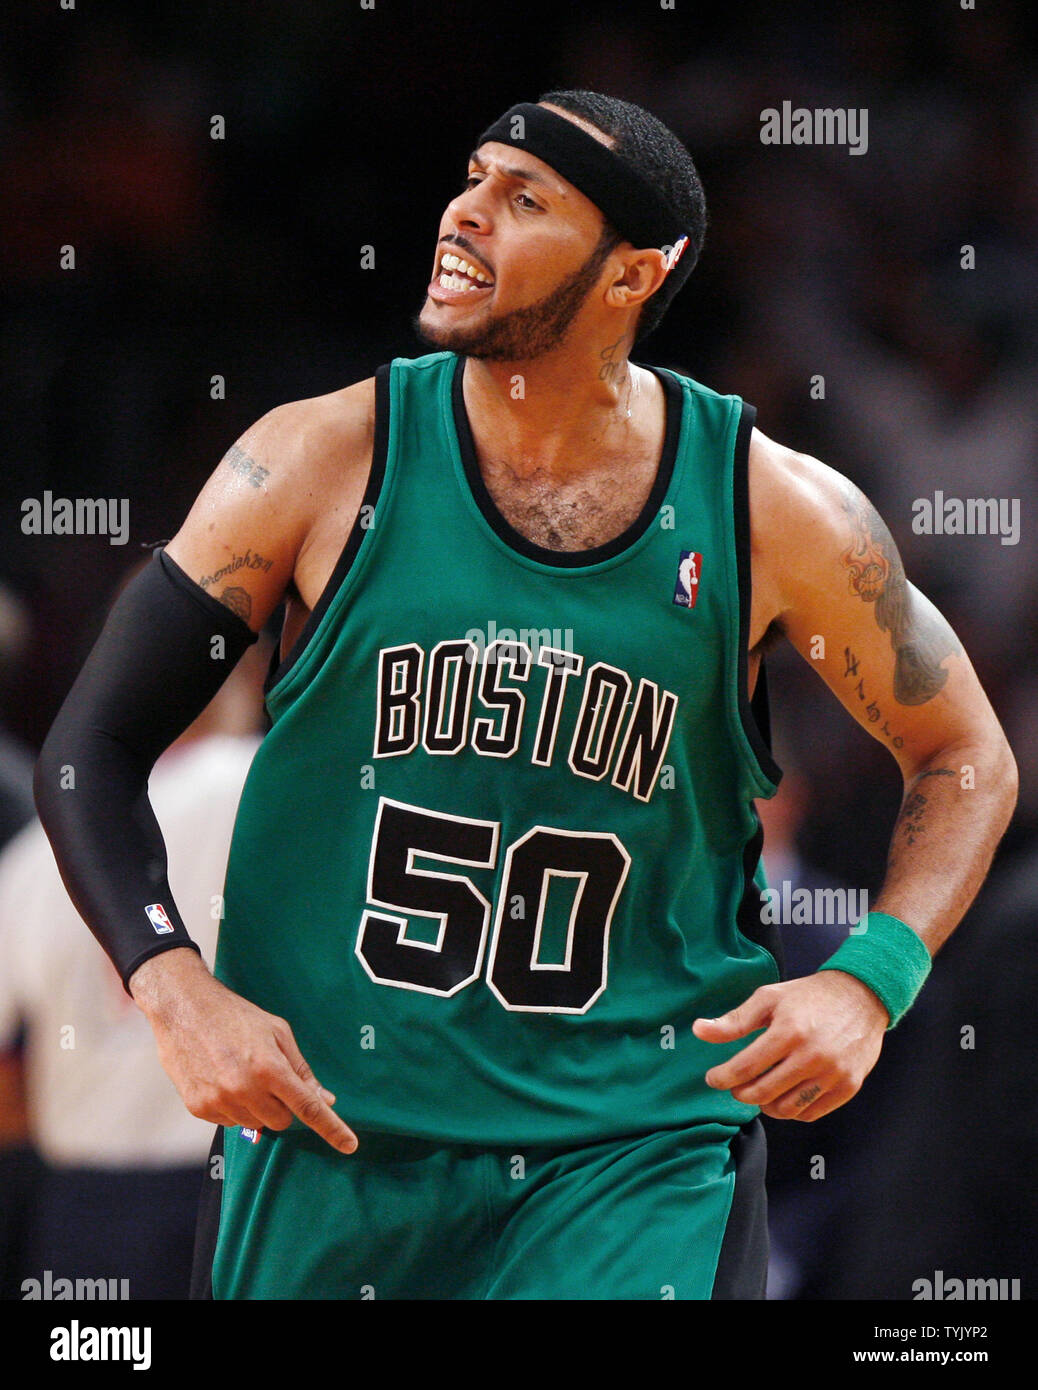 Most Hyped: The 2008 Boston Celtics Bench: Eddie House and James